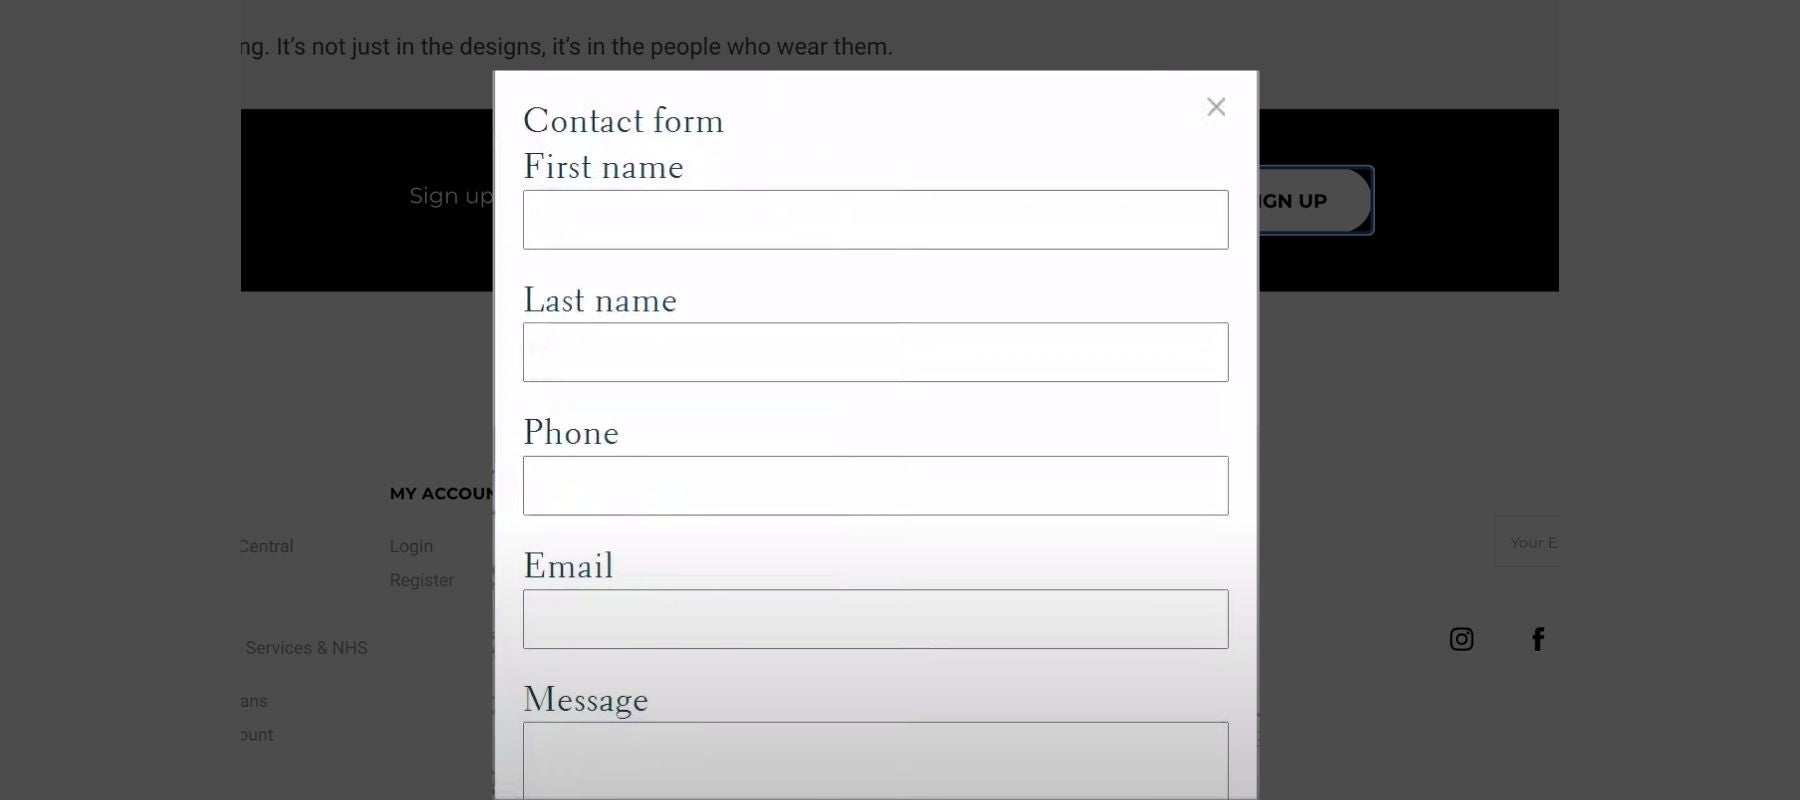 Integrate The Contact Form